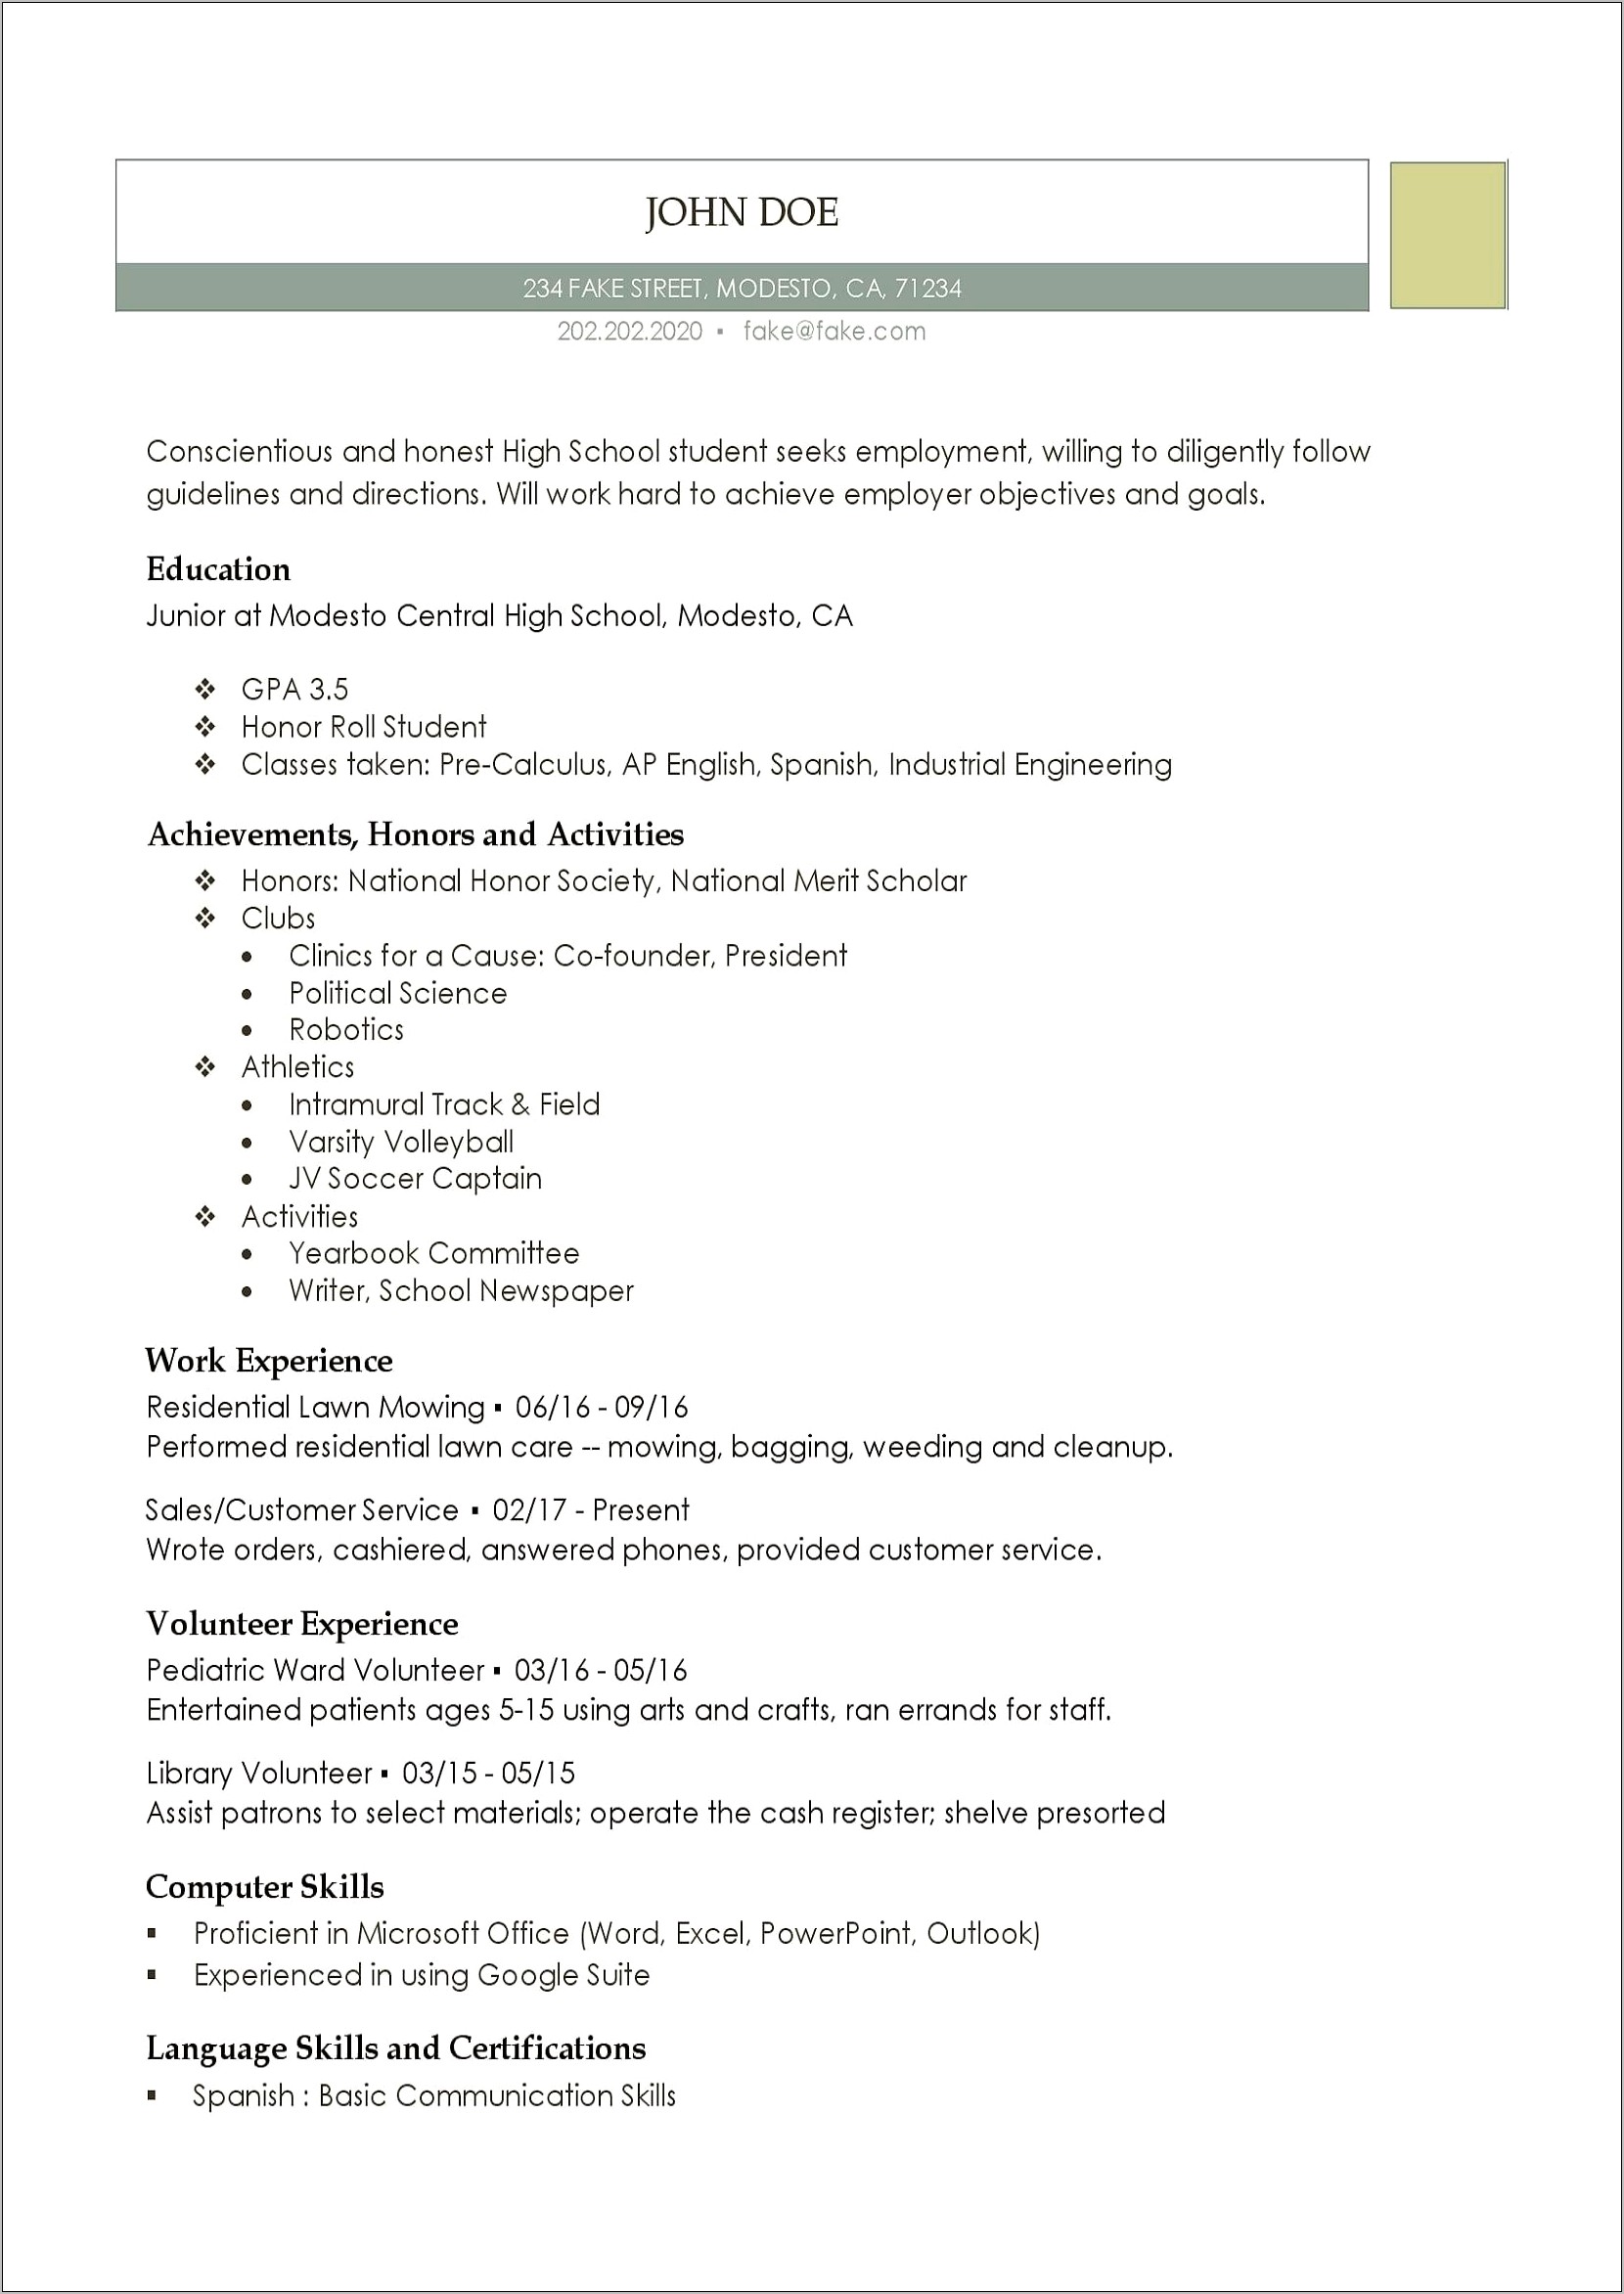 Resume Format For A High School Studen